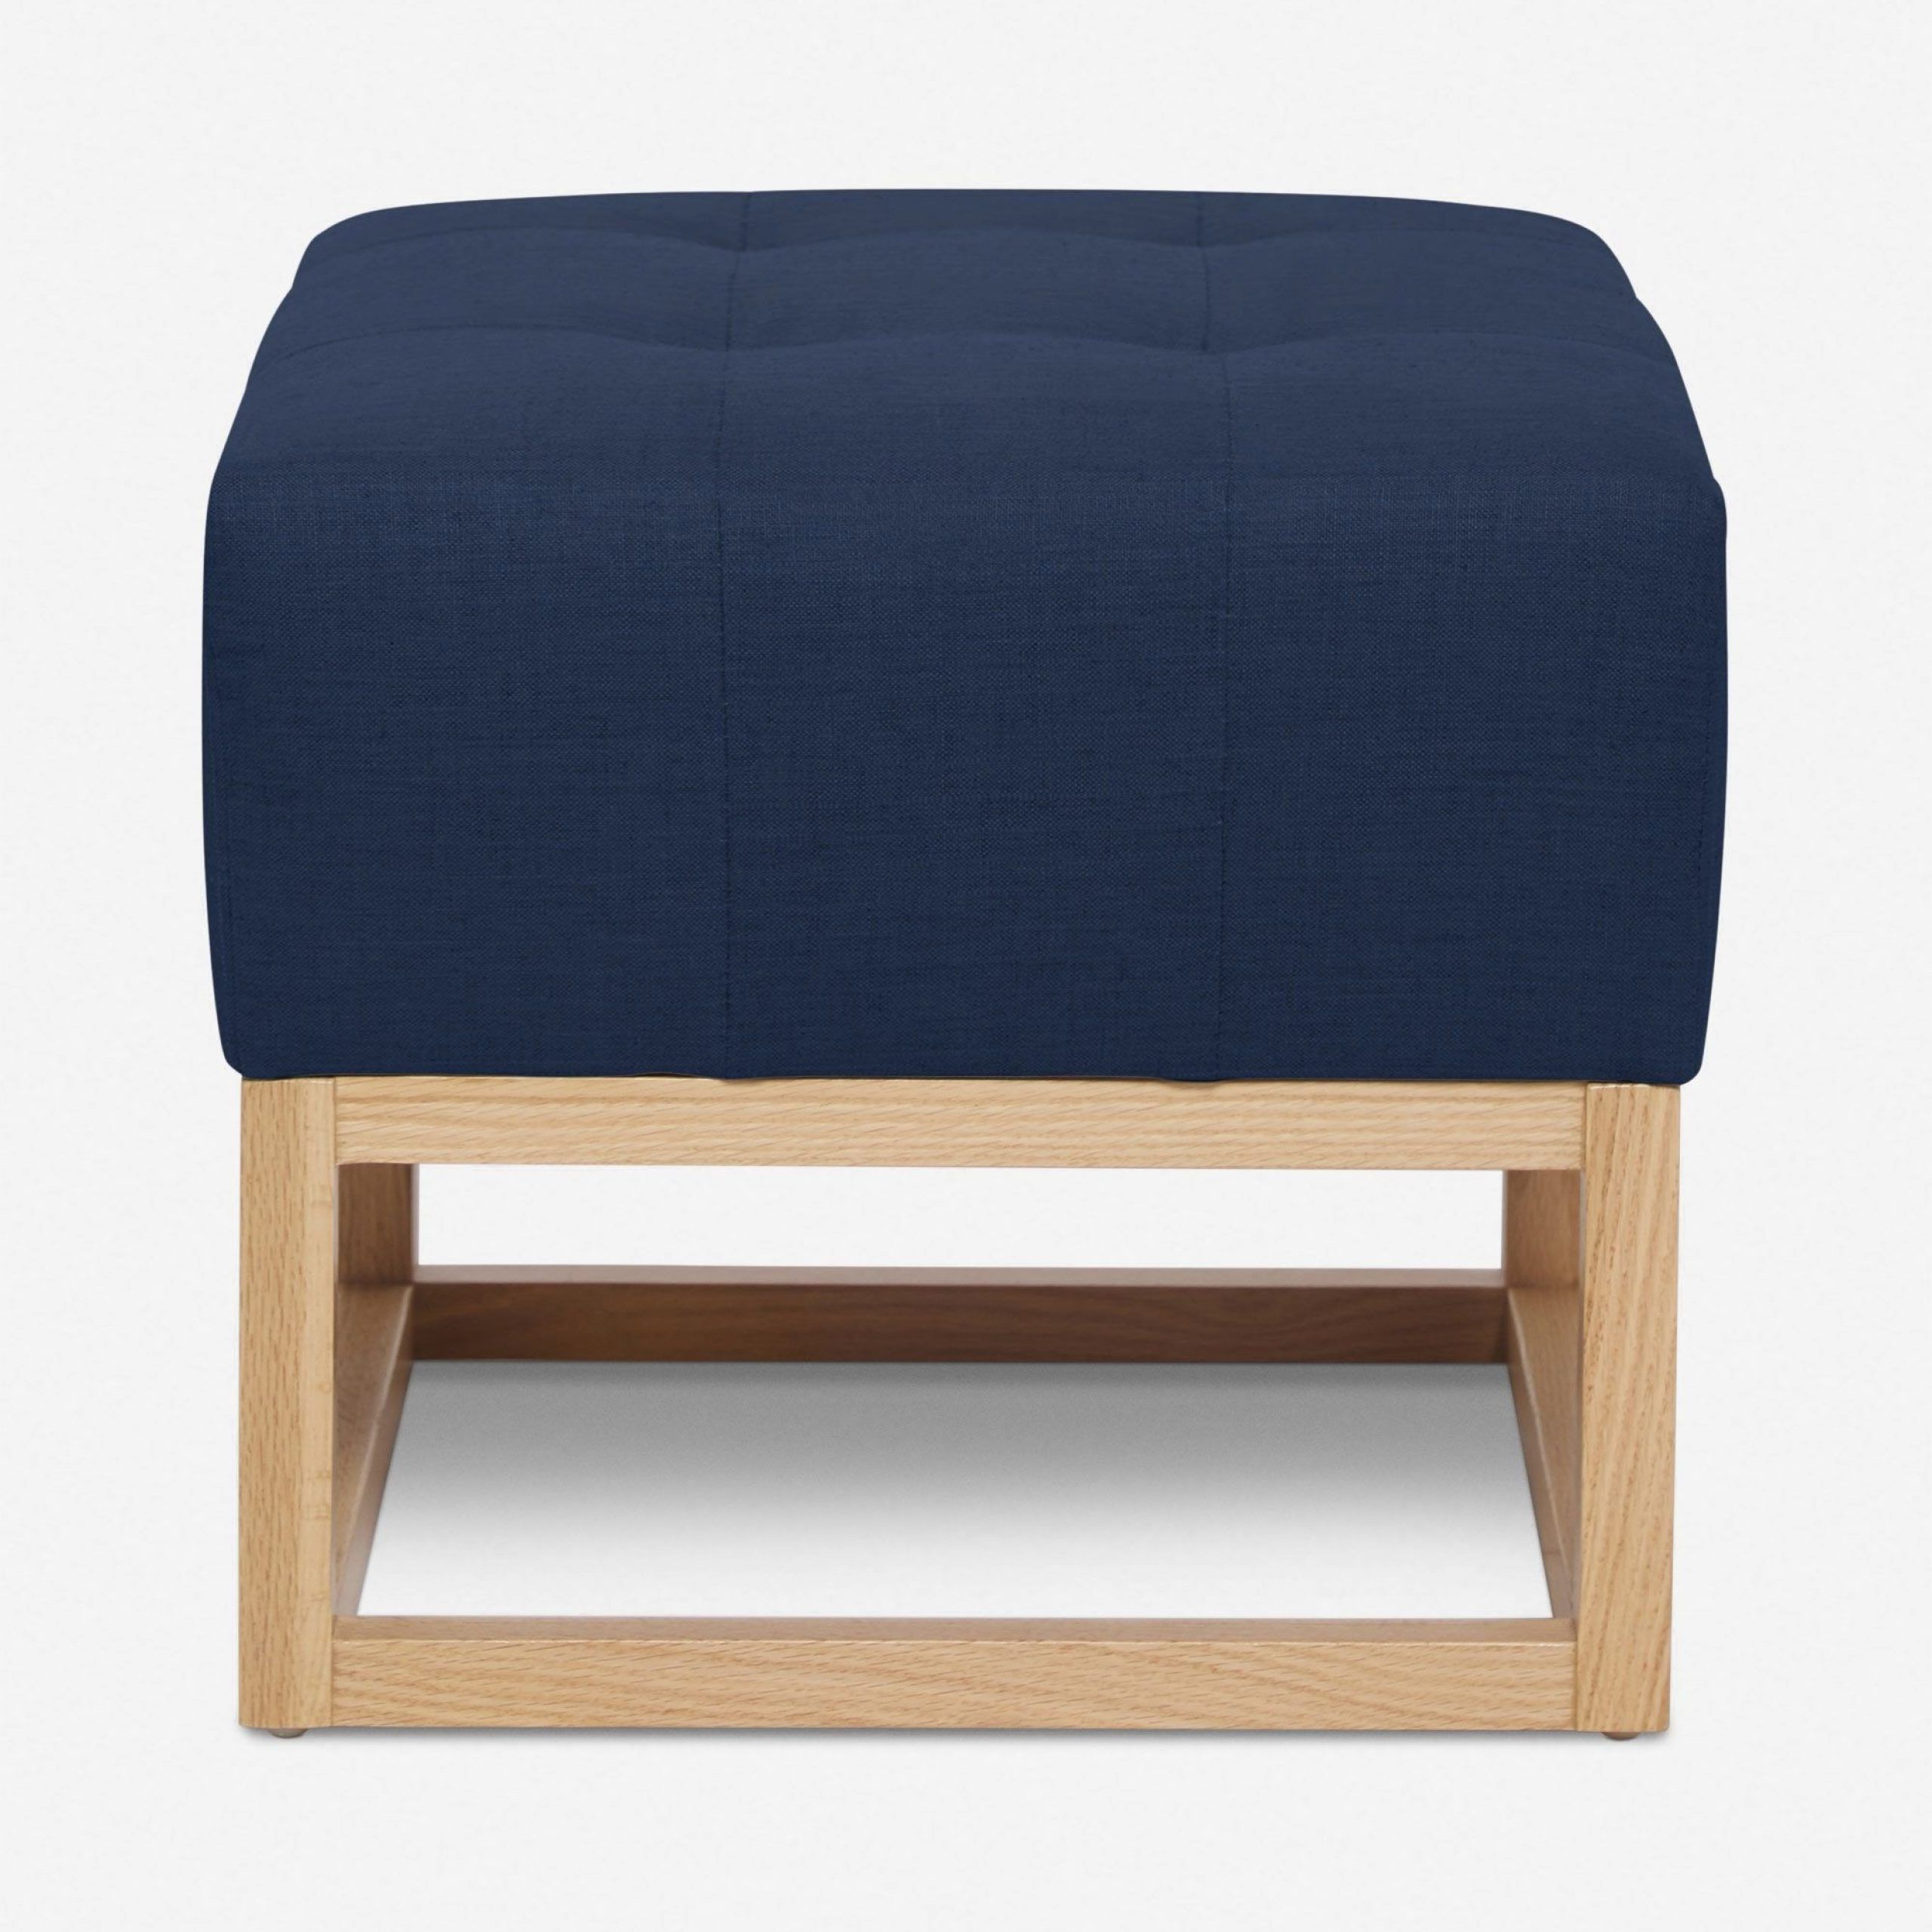 Ottoman, Linen Ottoman In Dark Blue And Navy Cotton Pouf Ottomans (View 2 of 10)